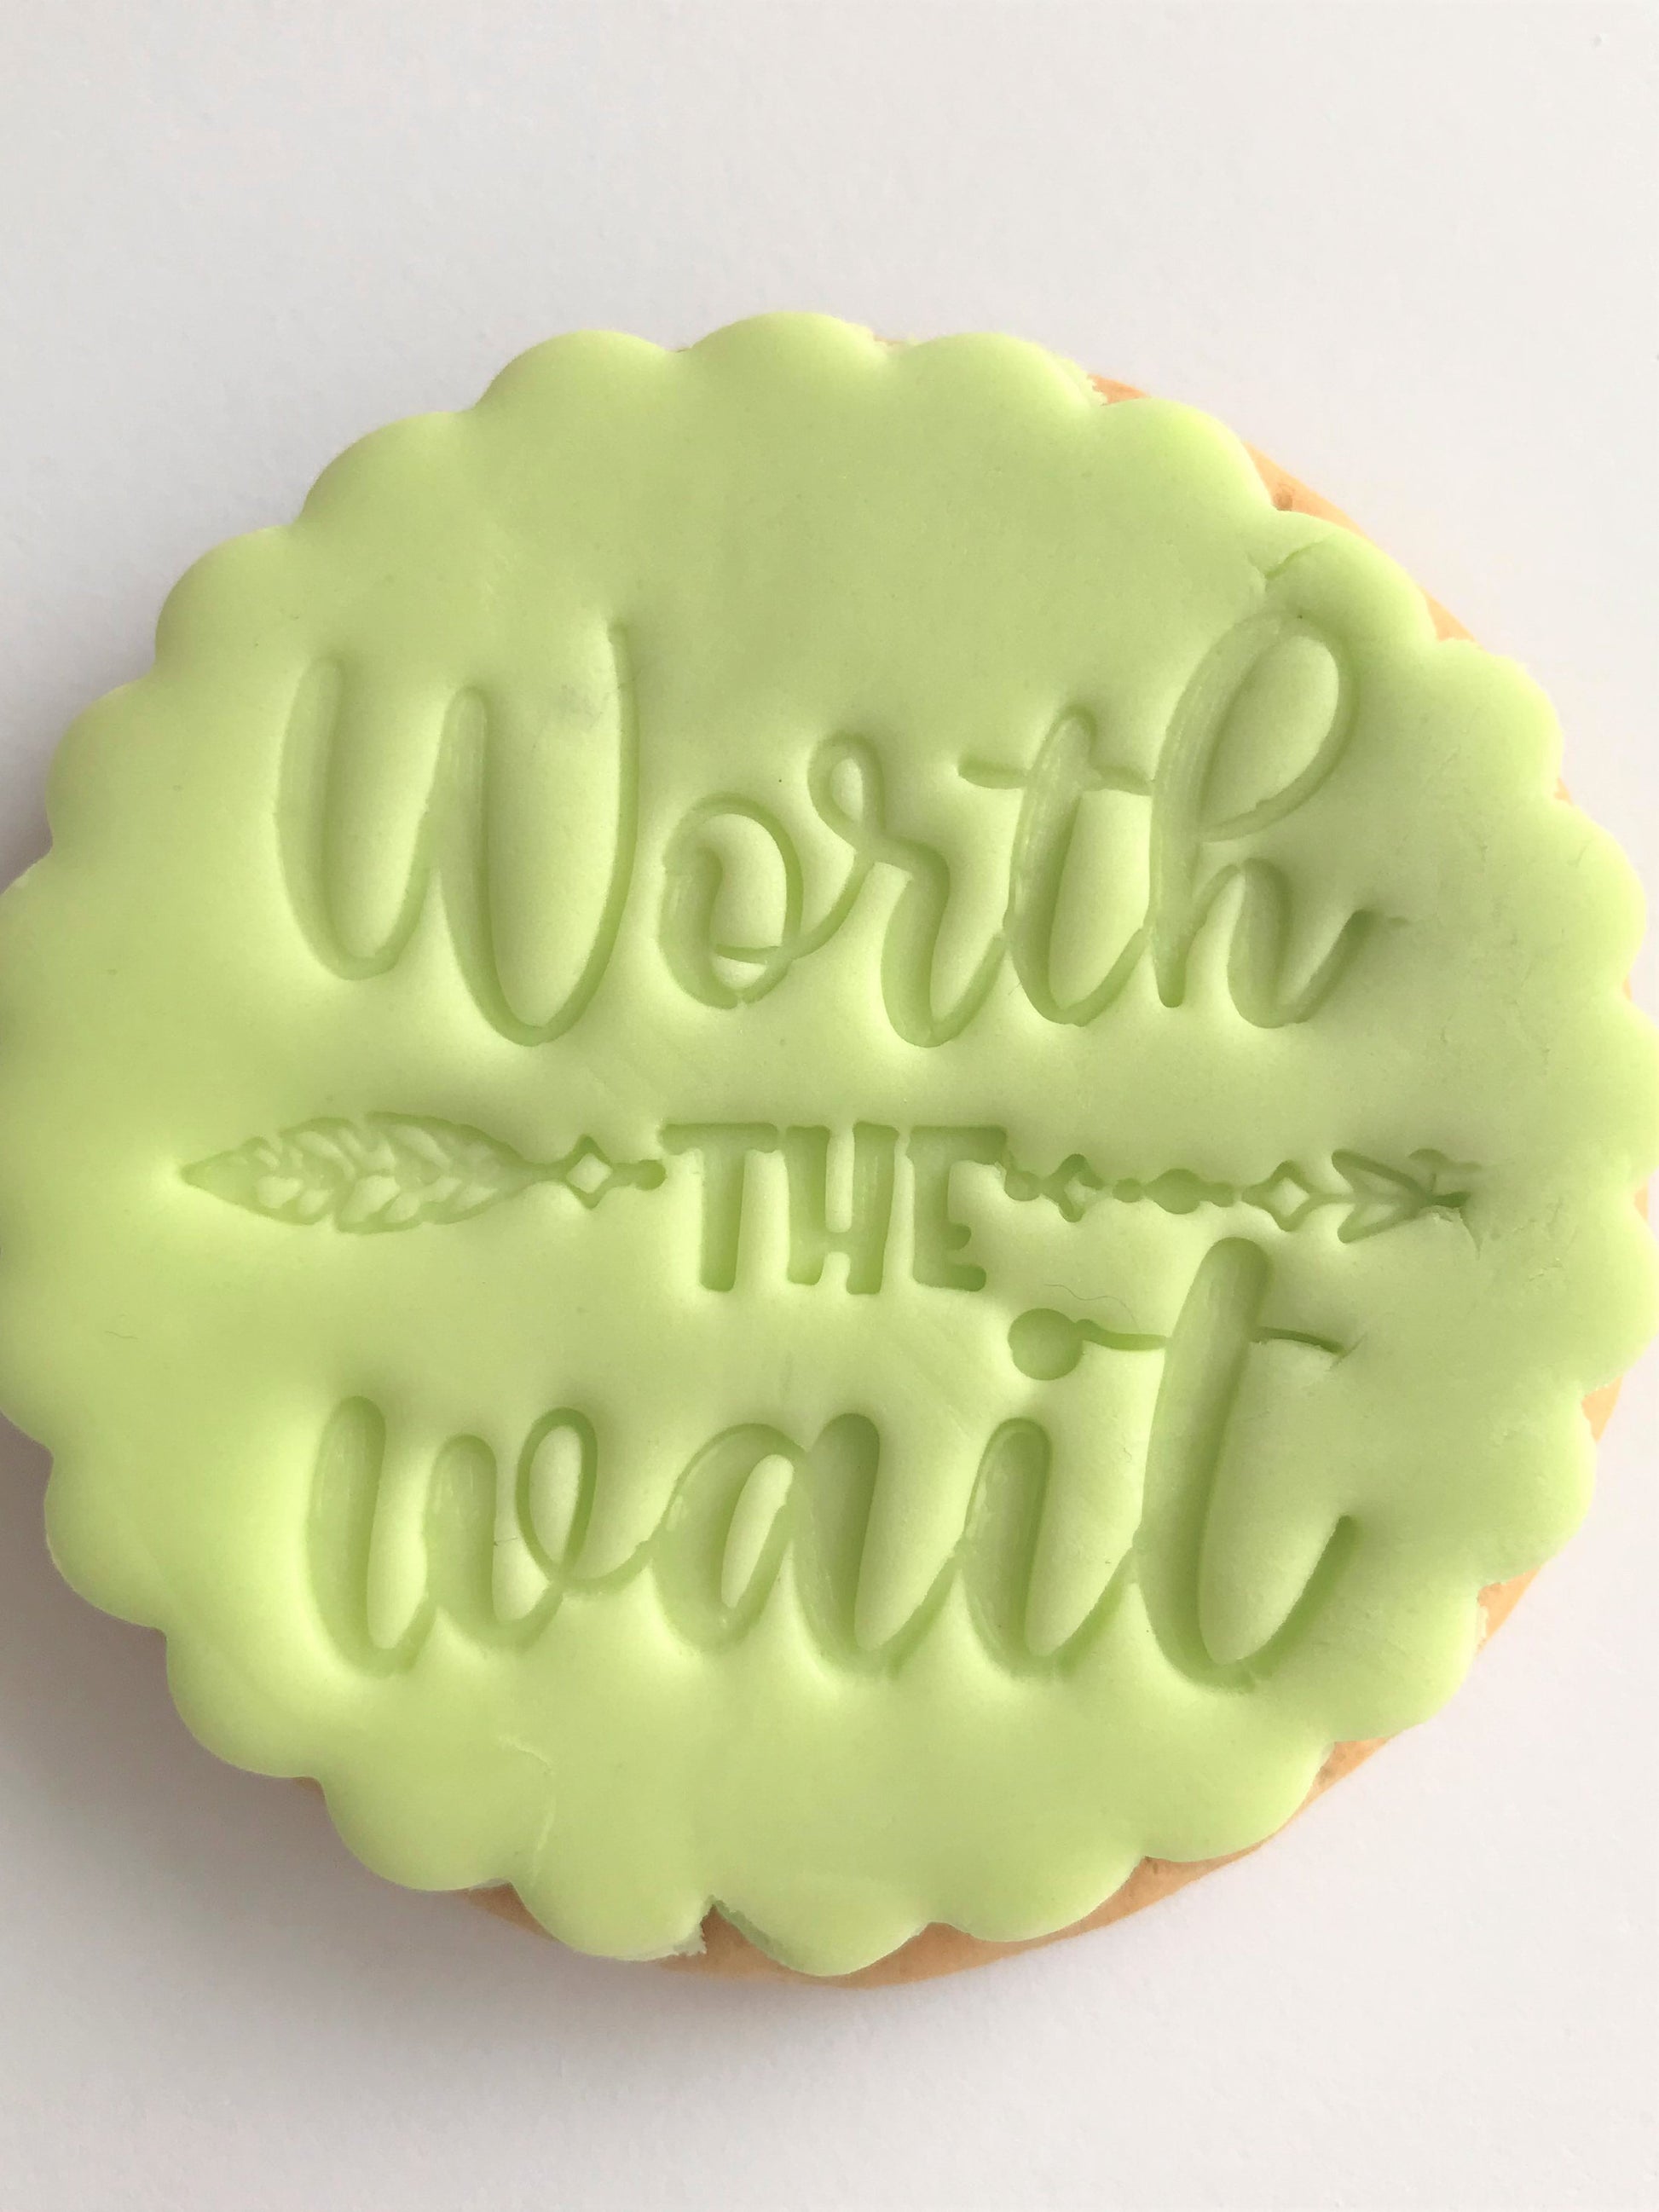 Worth the Wait Stamp Cookie Stamp